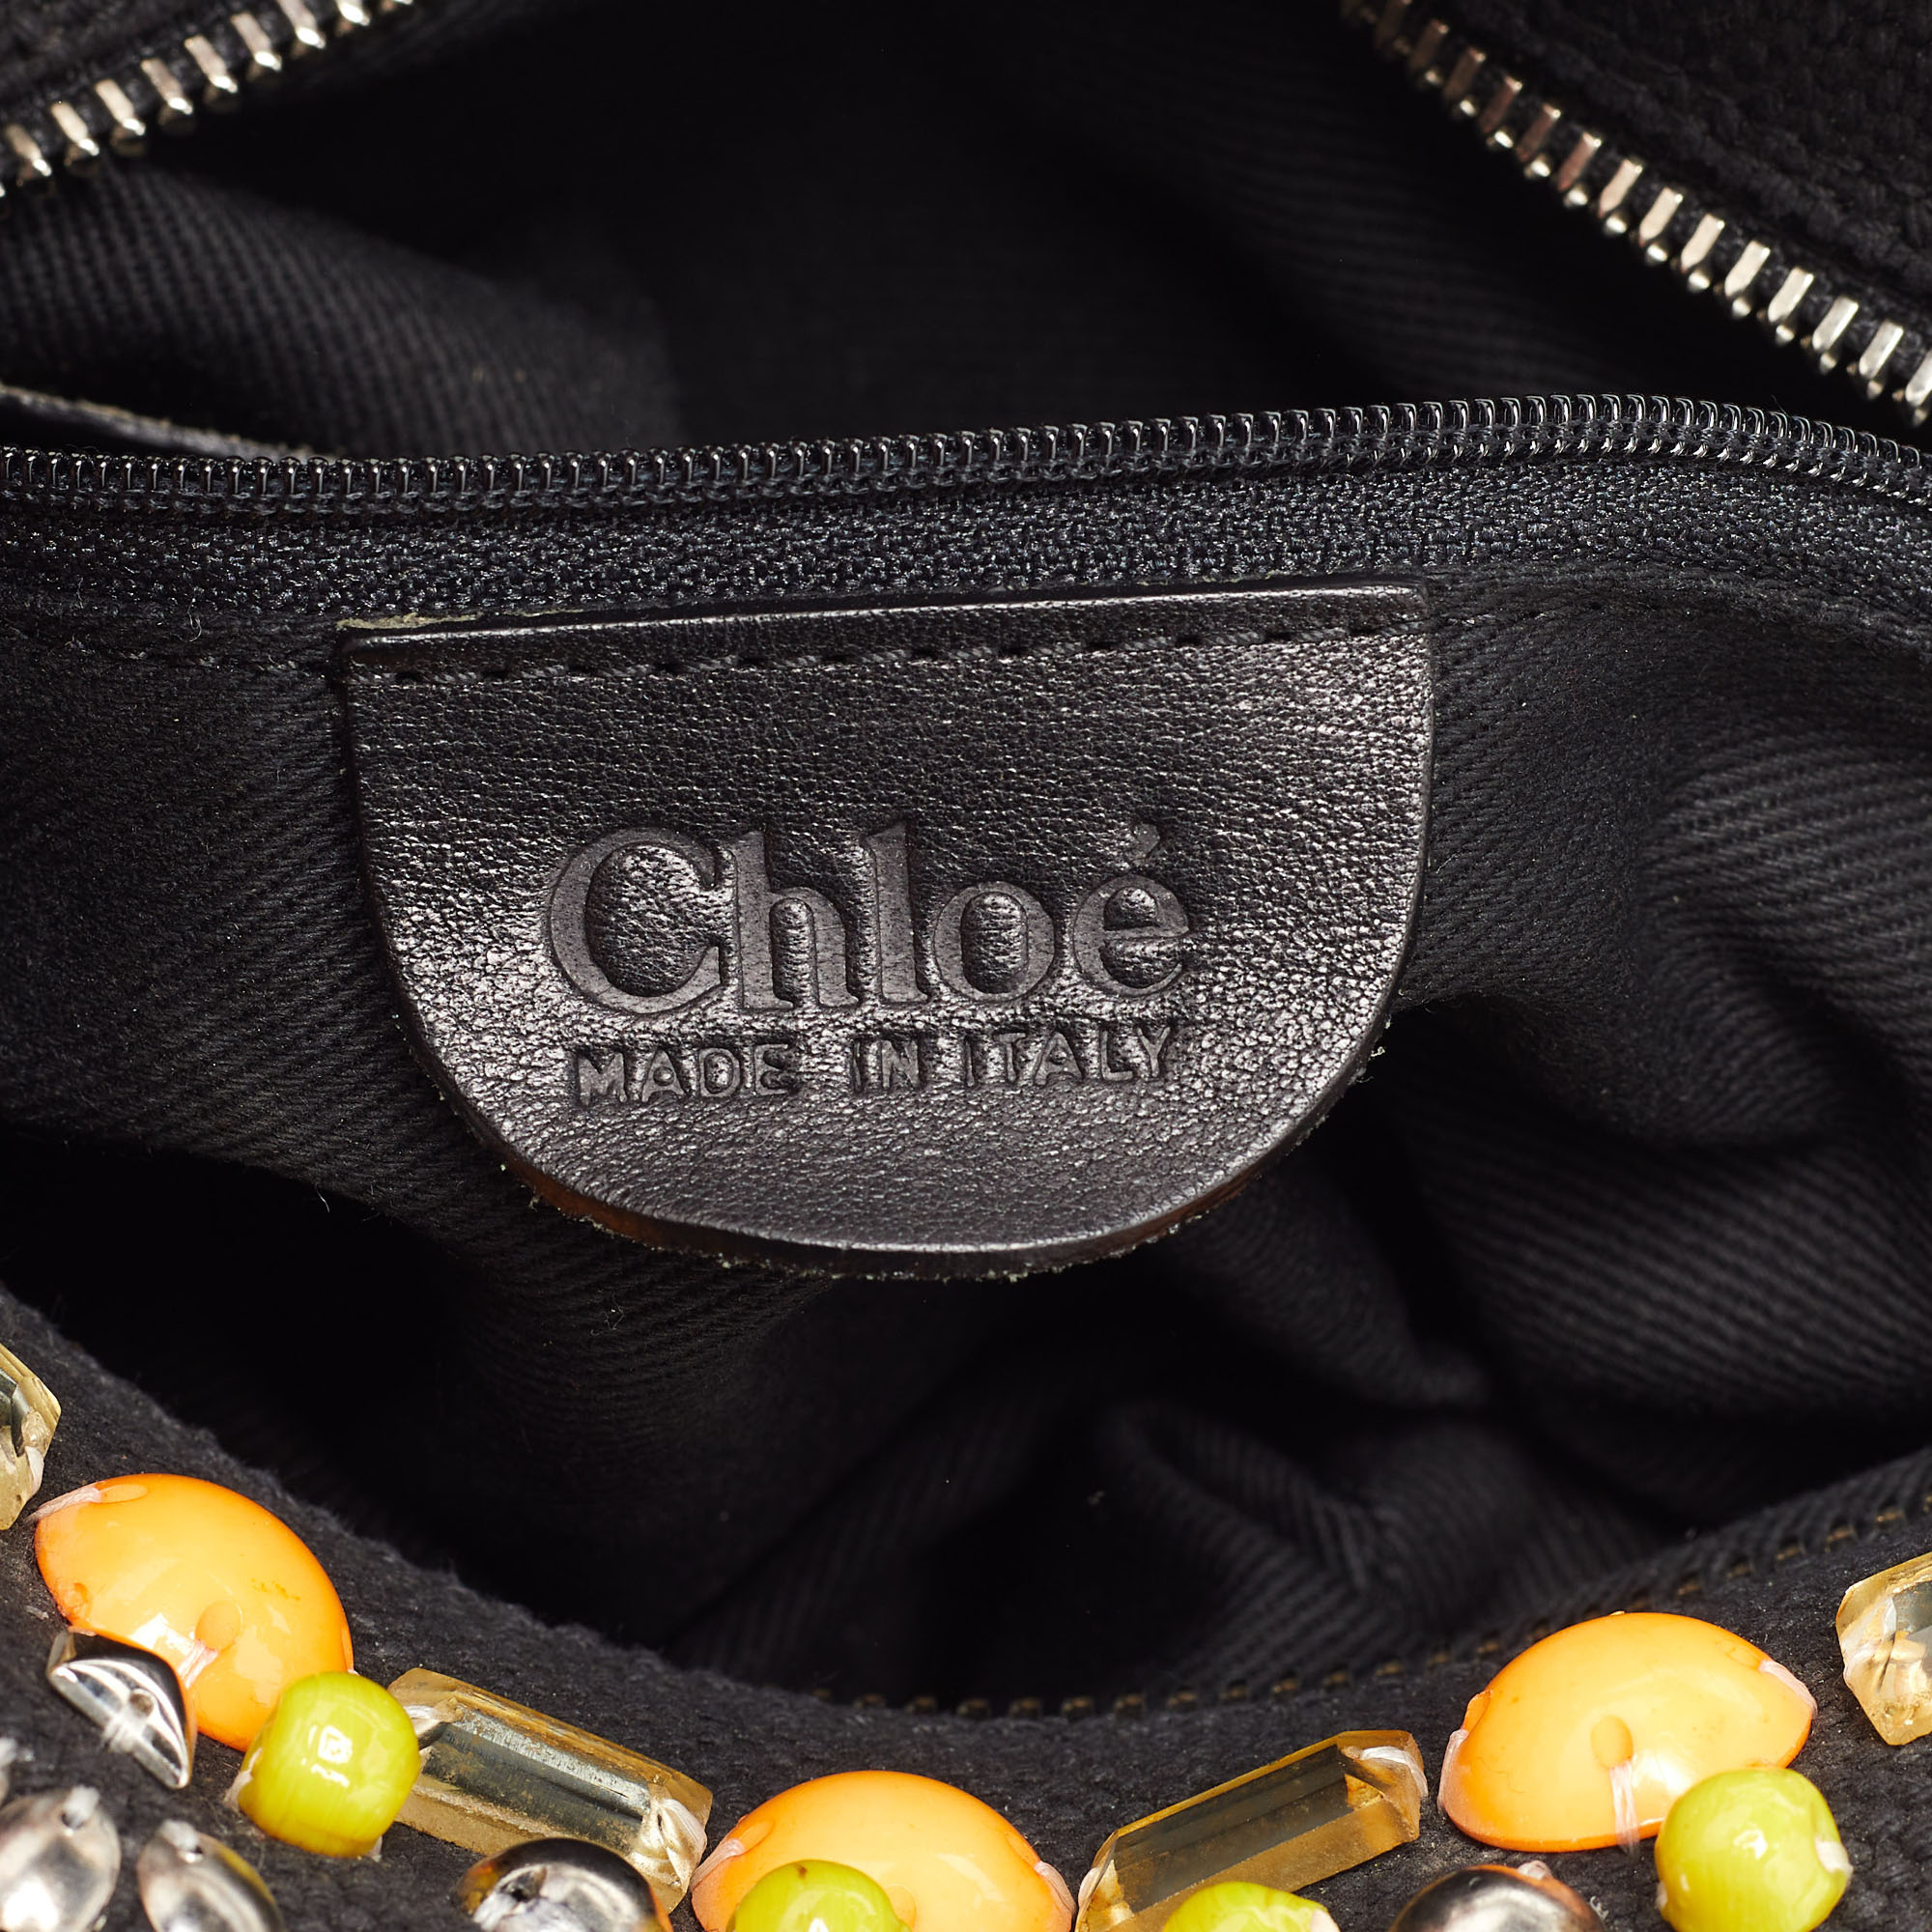 Chloe Black Canvas And Leather Embellished Ring Handle Hobo